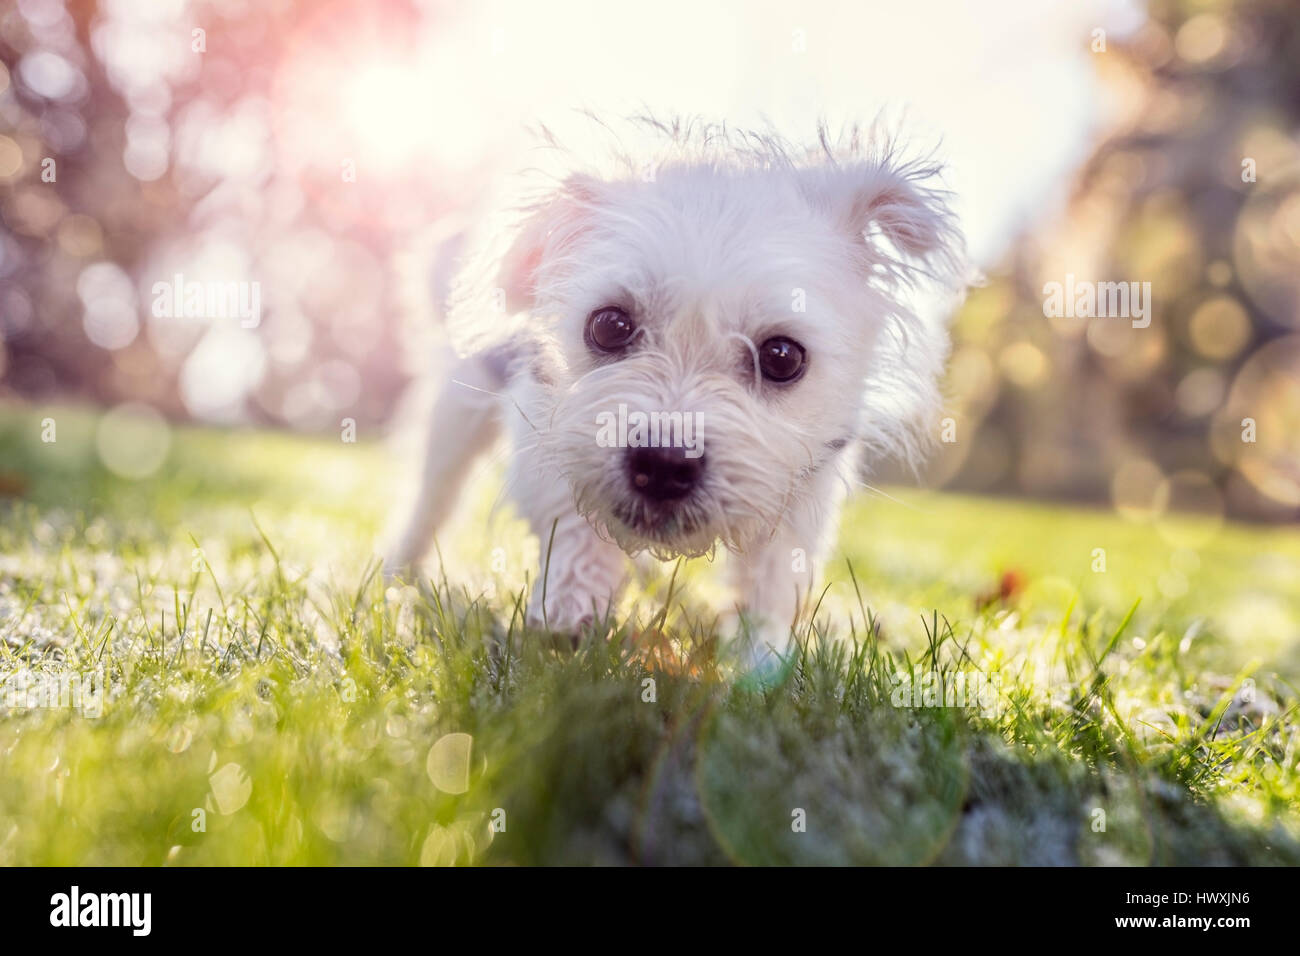 Young puppy outside walking in the park on a sunny day Stock Photo